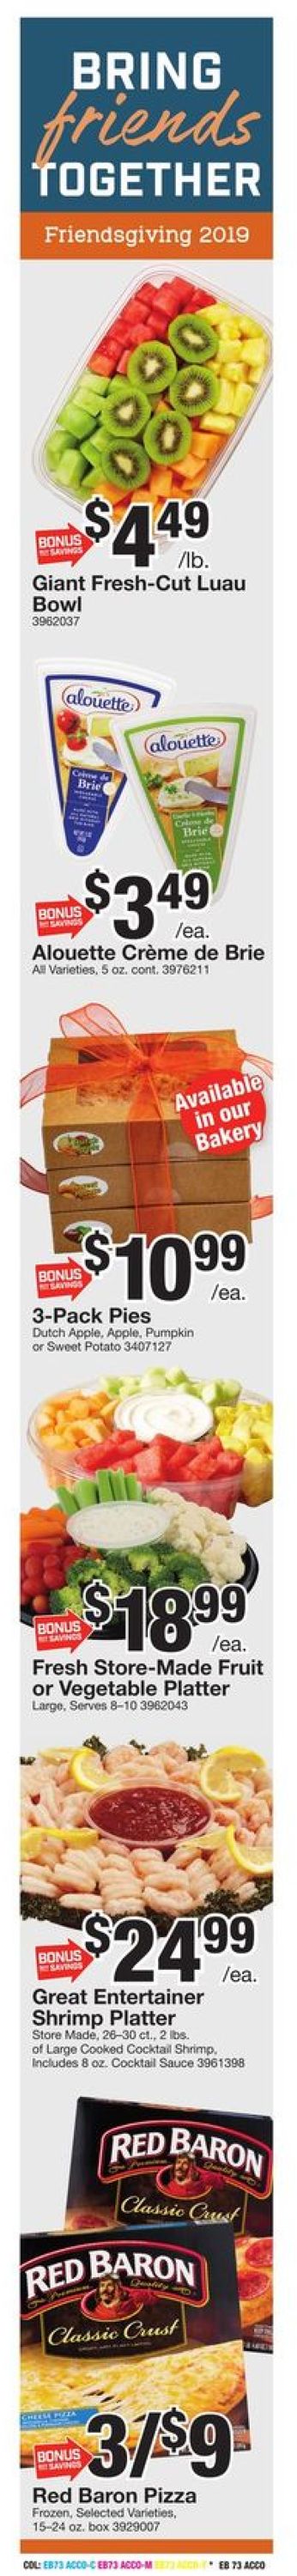 Giant Food - Thanksgiving Ad 2019 Weekly Ad Circular - valid 11/22-11/28/2019 (Page 3)